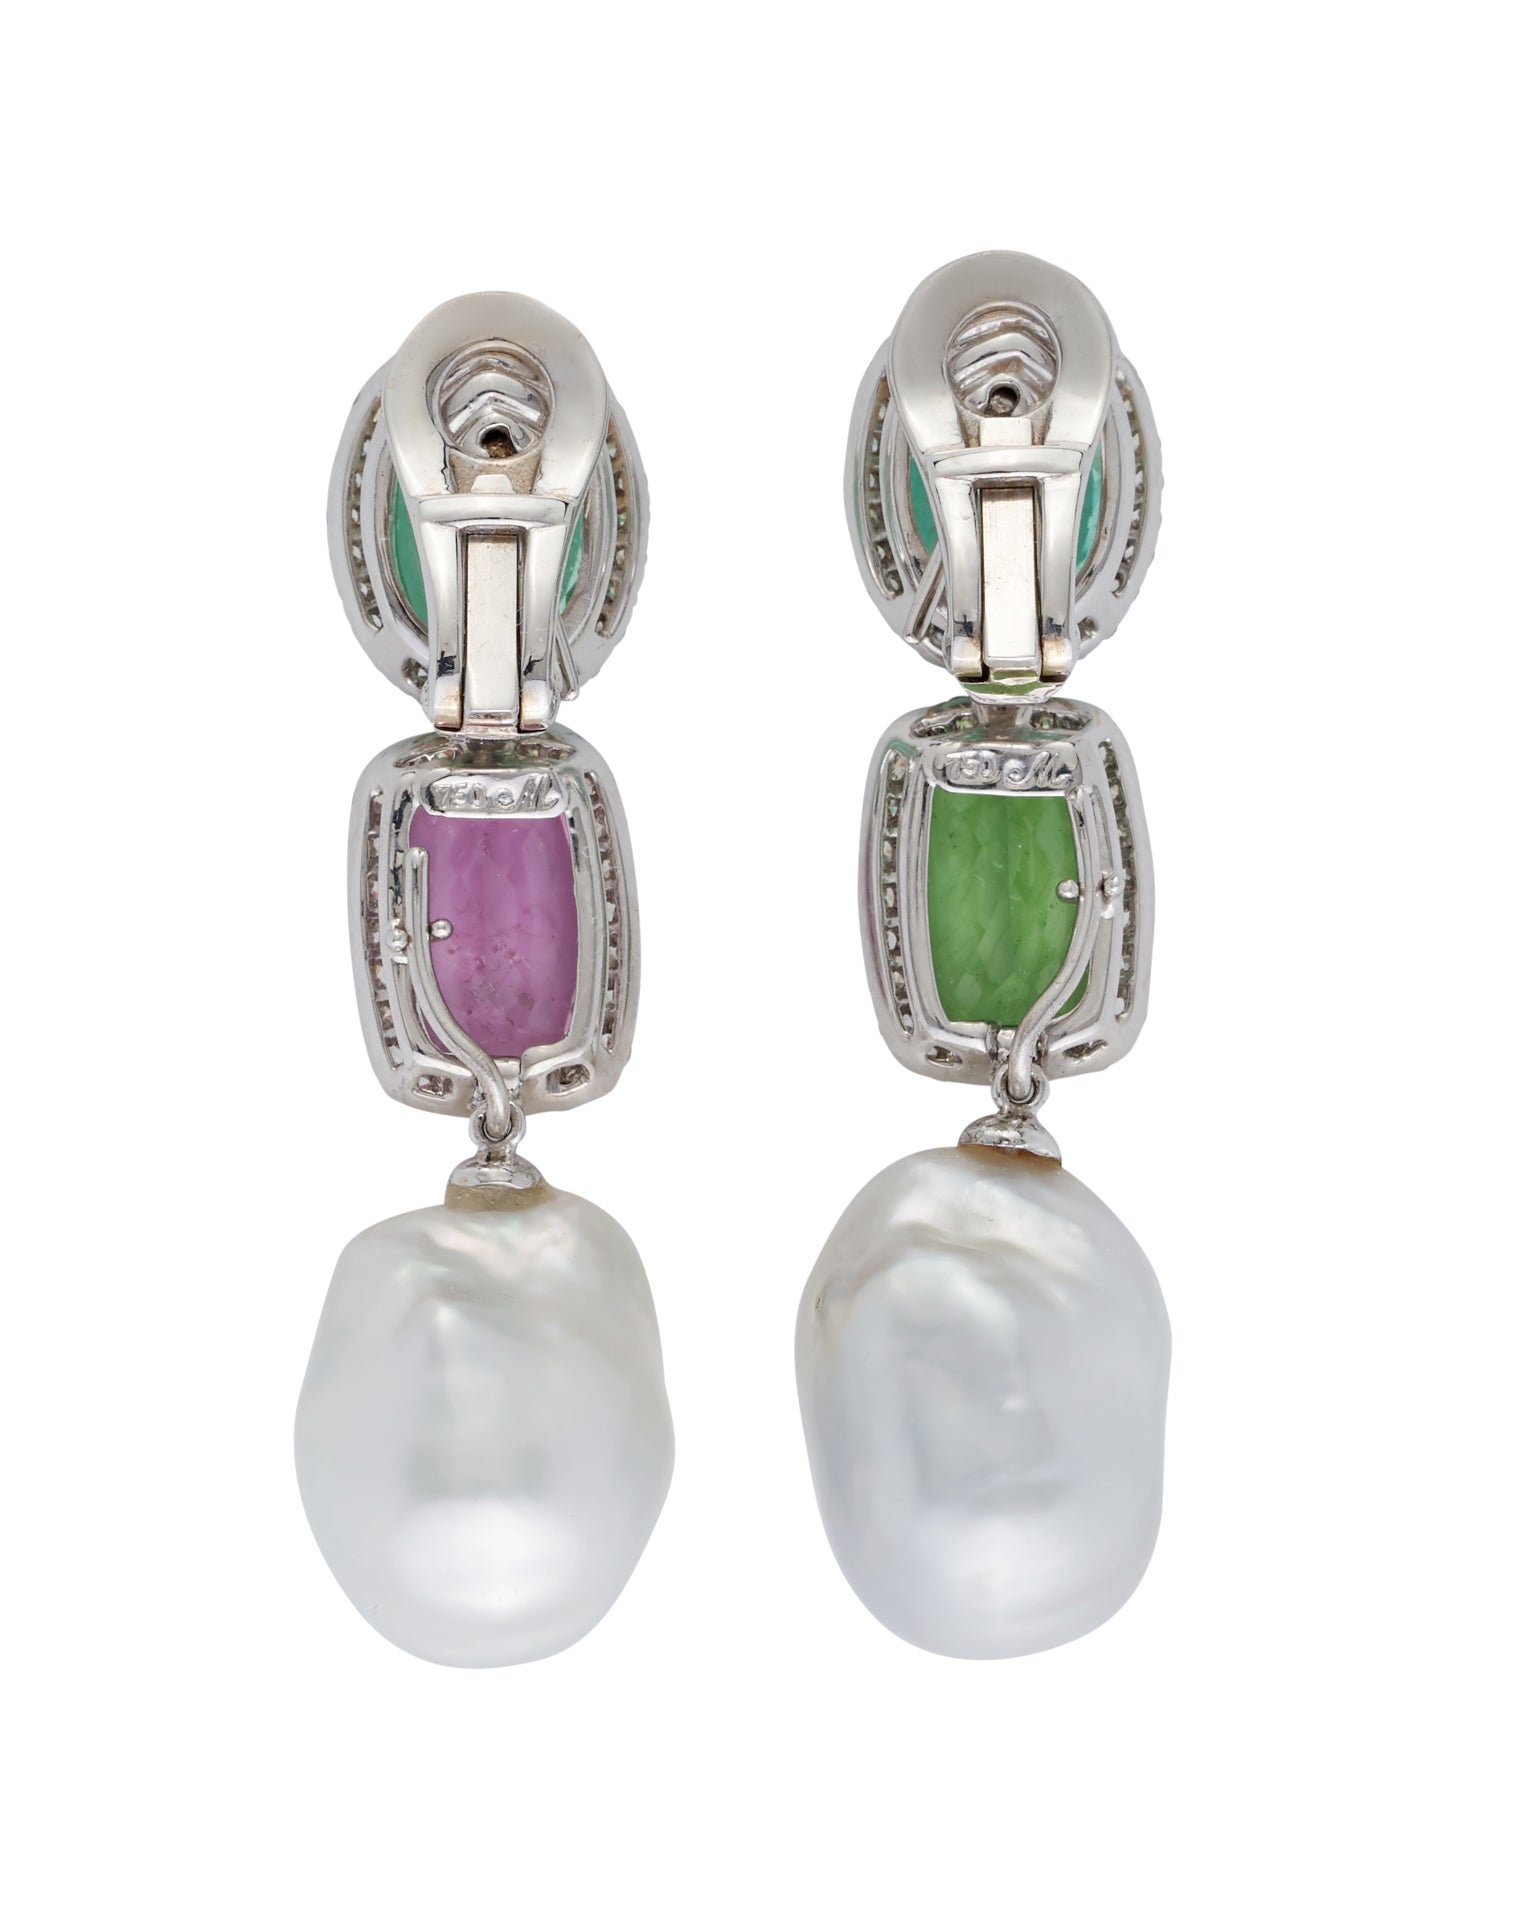 South Sea Pearl, tourmaline and diamond earrings, crafted in 18 karat white gold.